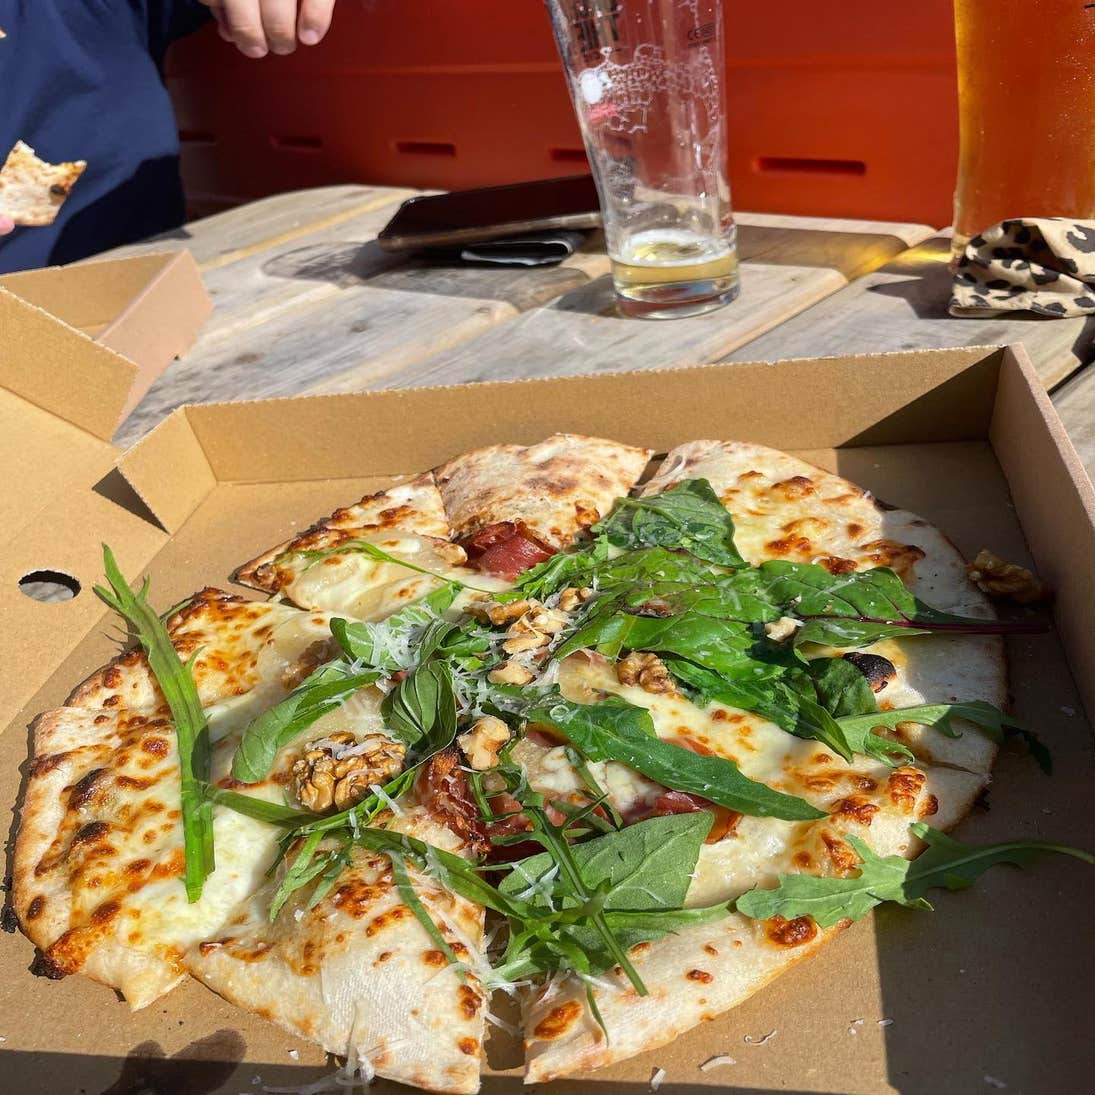 A pizza from the Rusty Oven in Dunfanaghy in County Donegal.